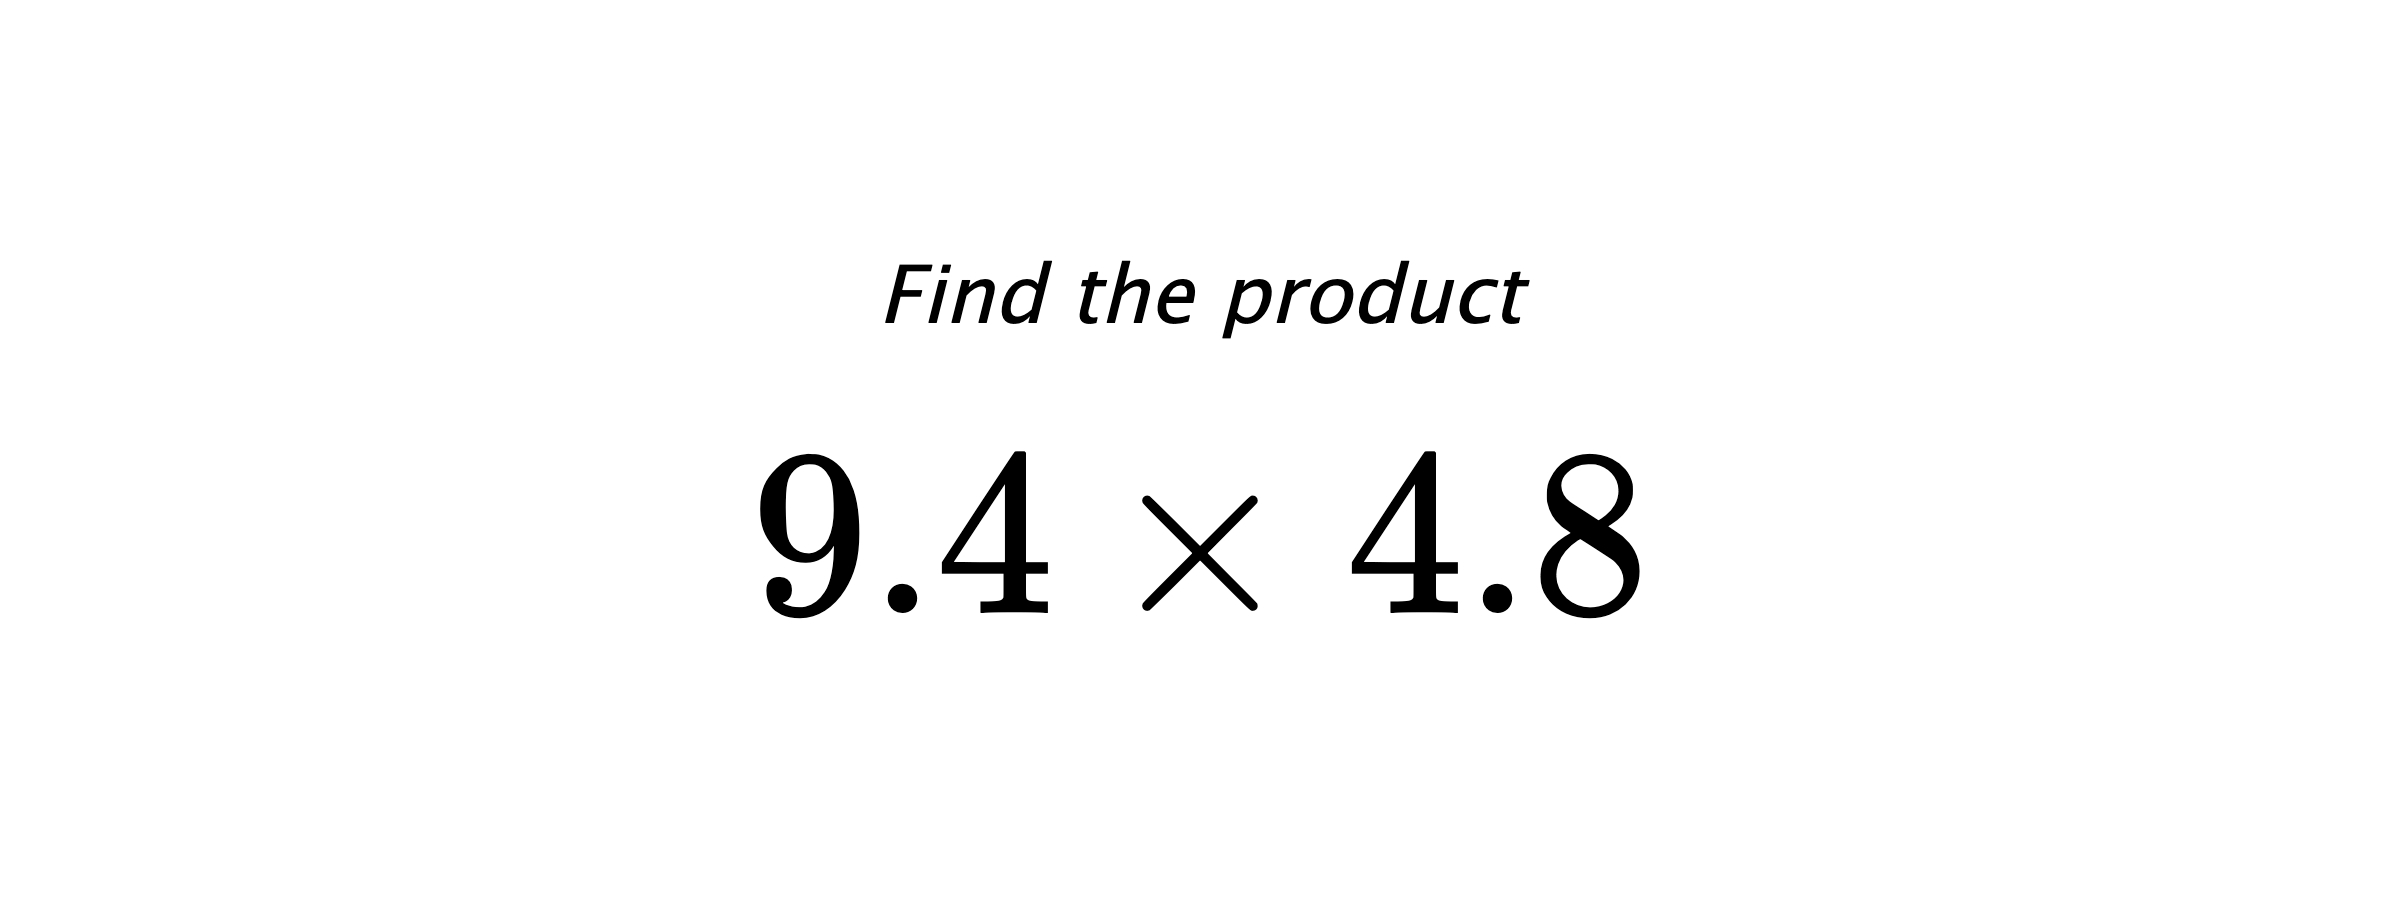 Find the product $ 9.4 \times 4.8 $